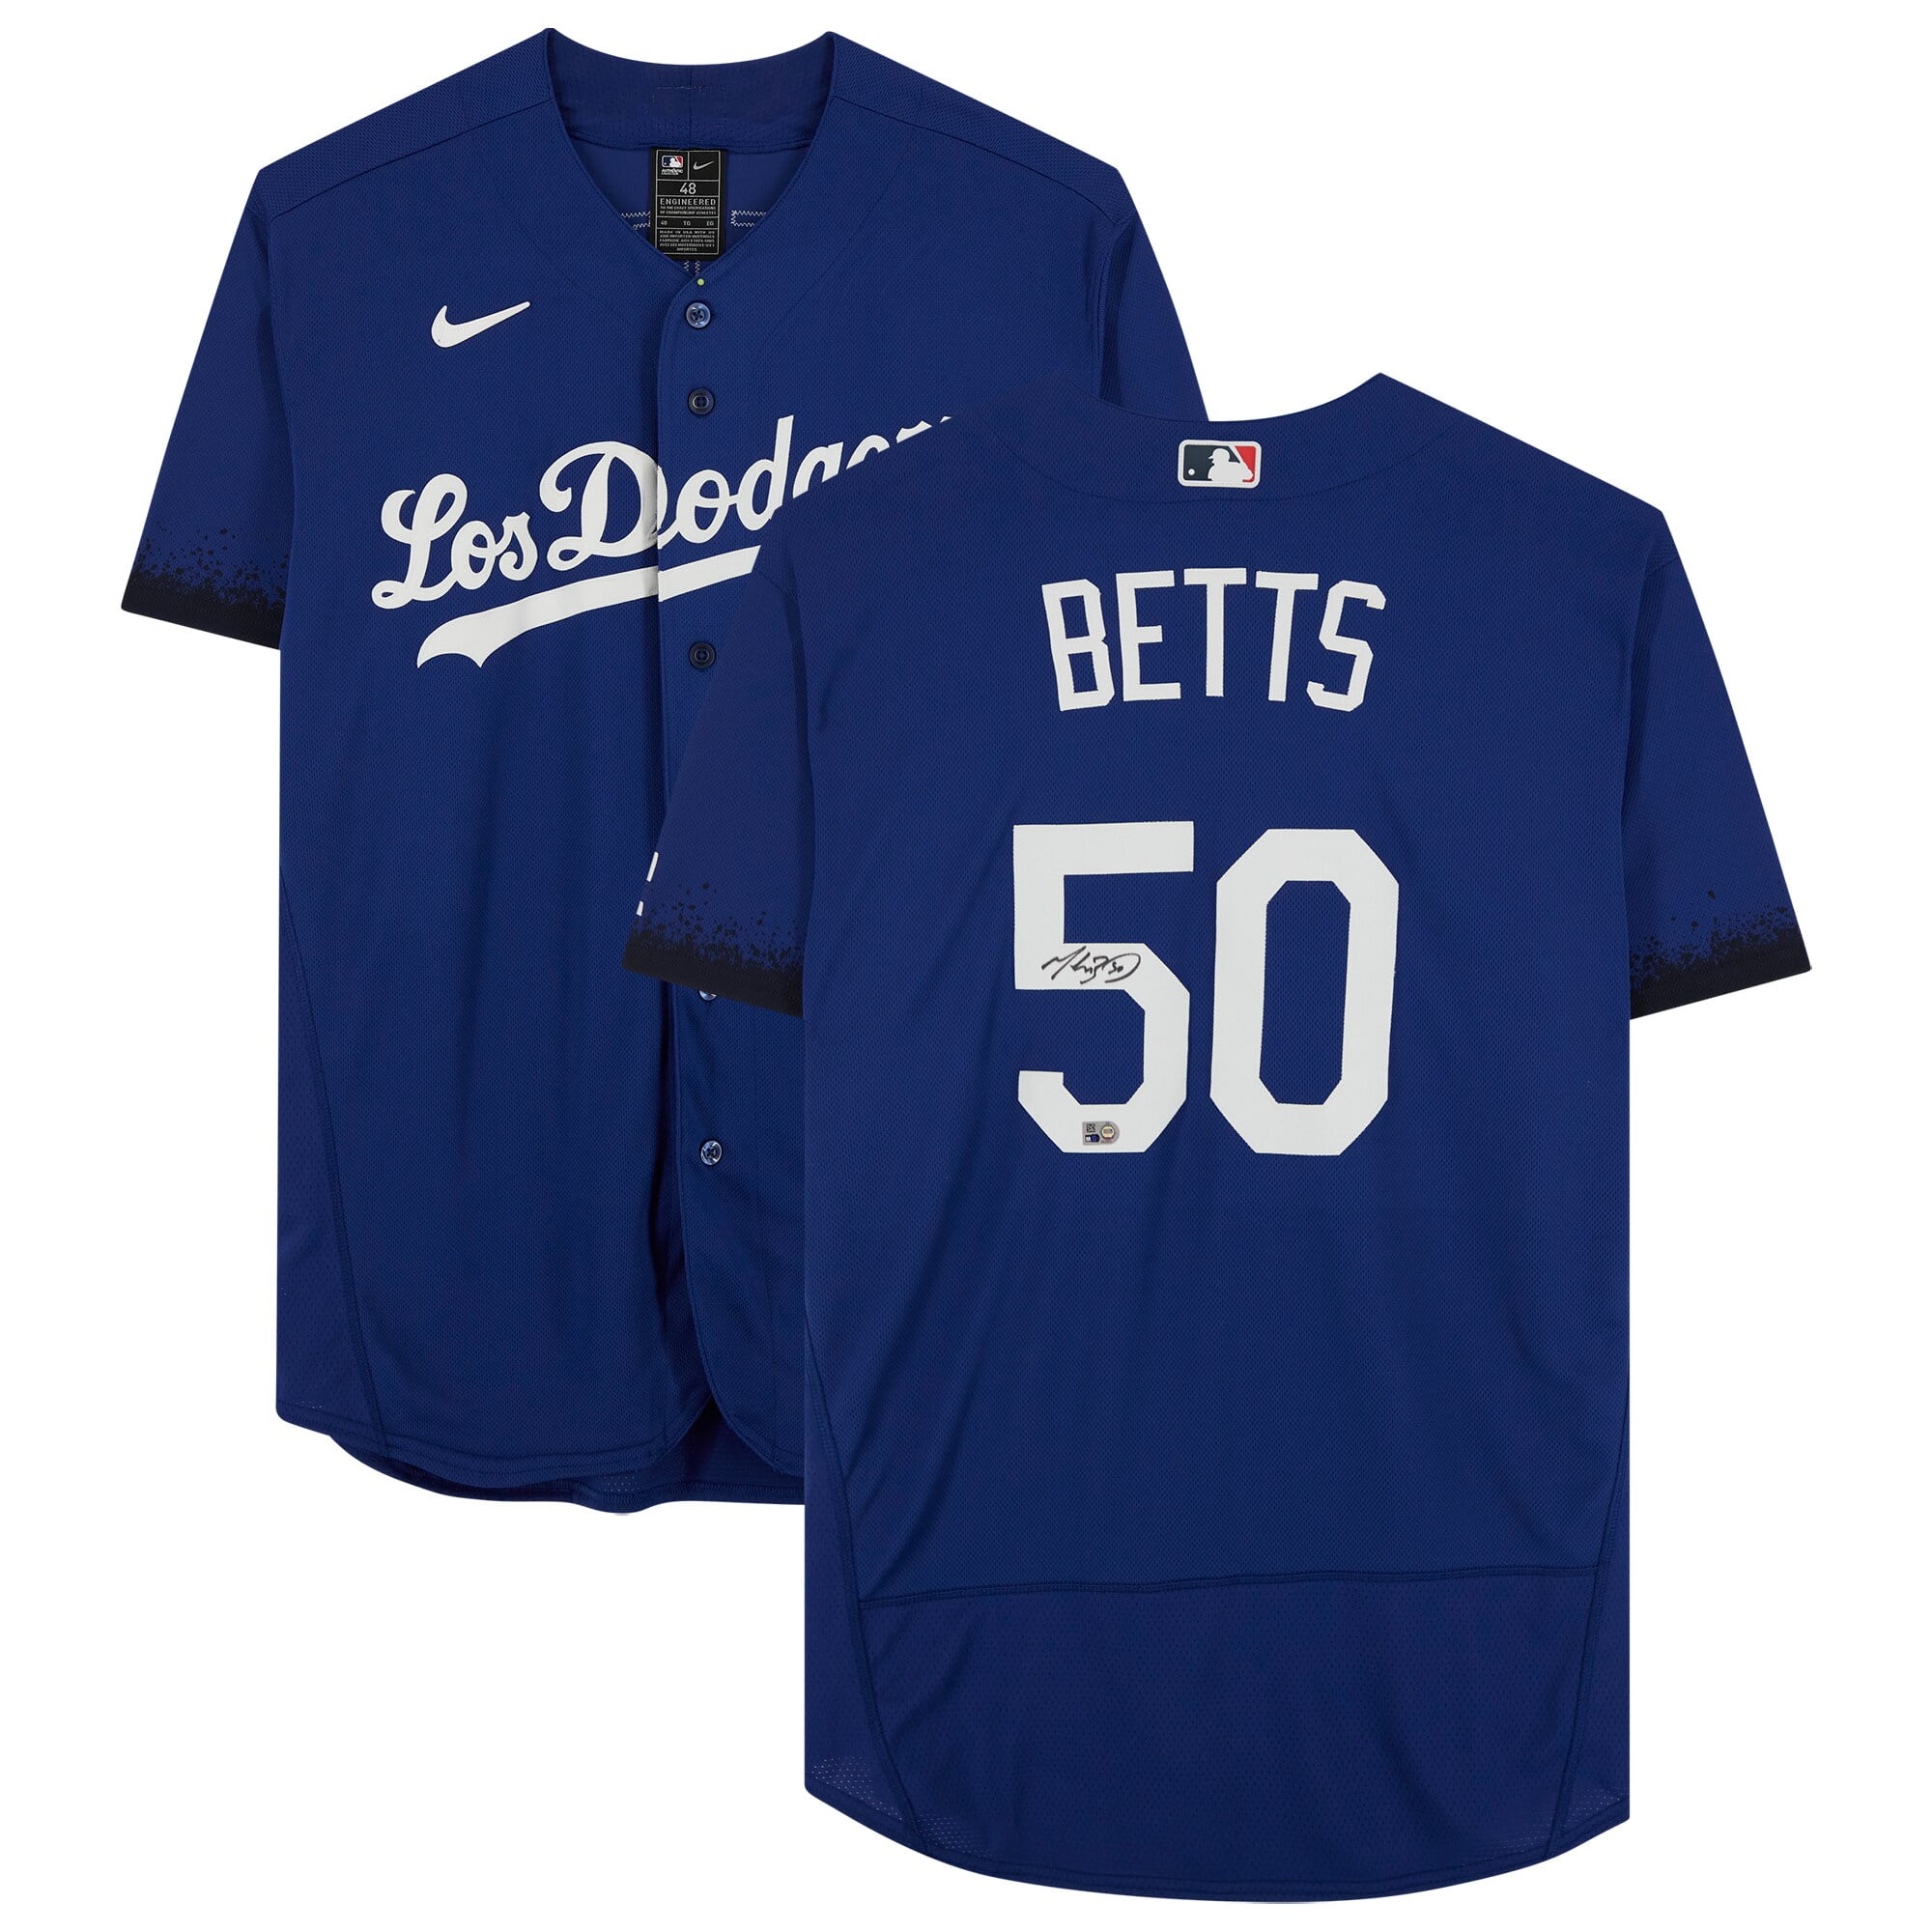 Mookie Betts Los Angeles Dodgers Autographed Gray Nike Authentic Jersey 